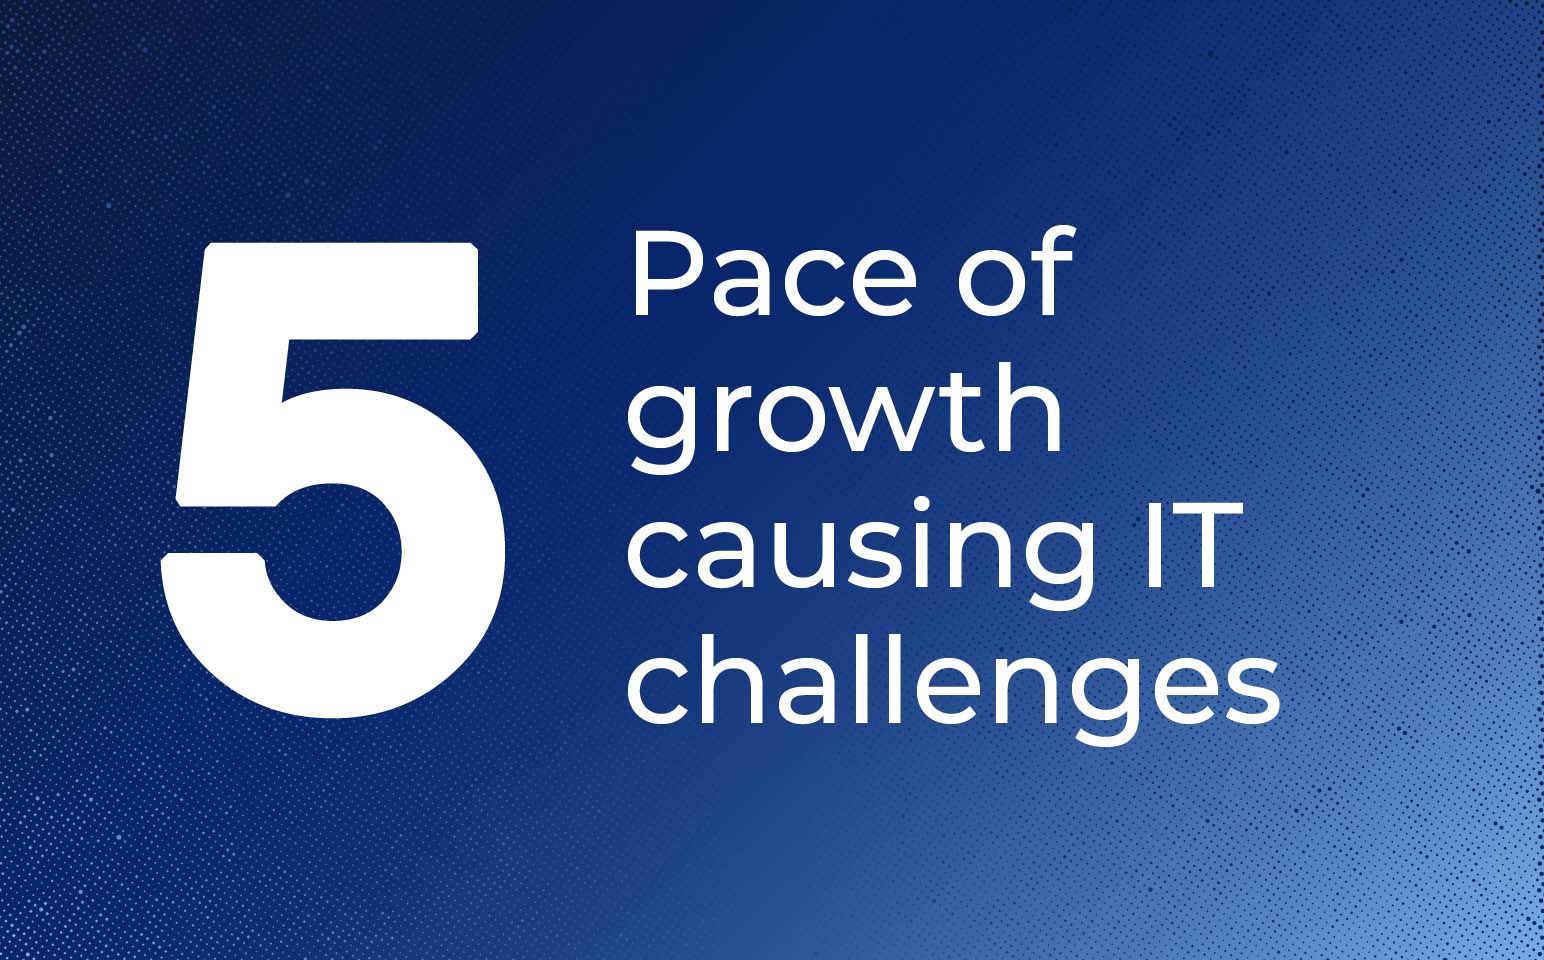 Challenge 5 – Pace of growth causing IT challenges